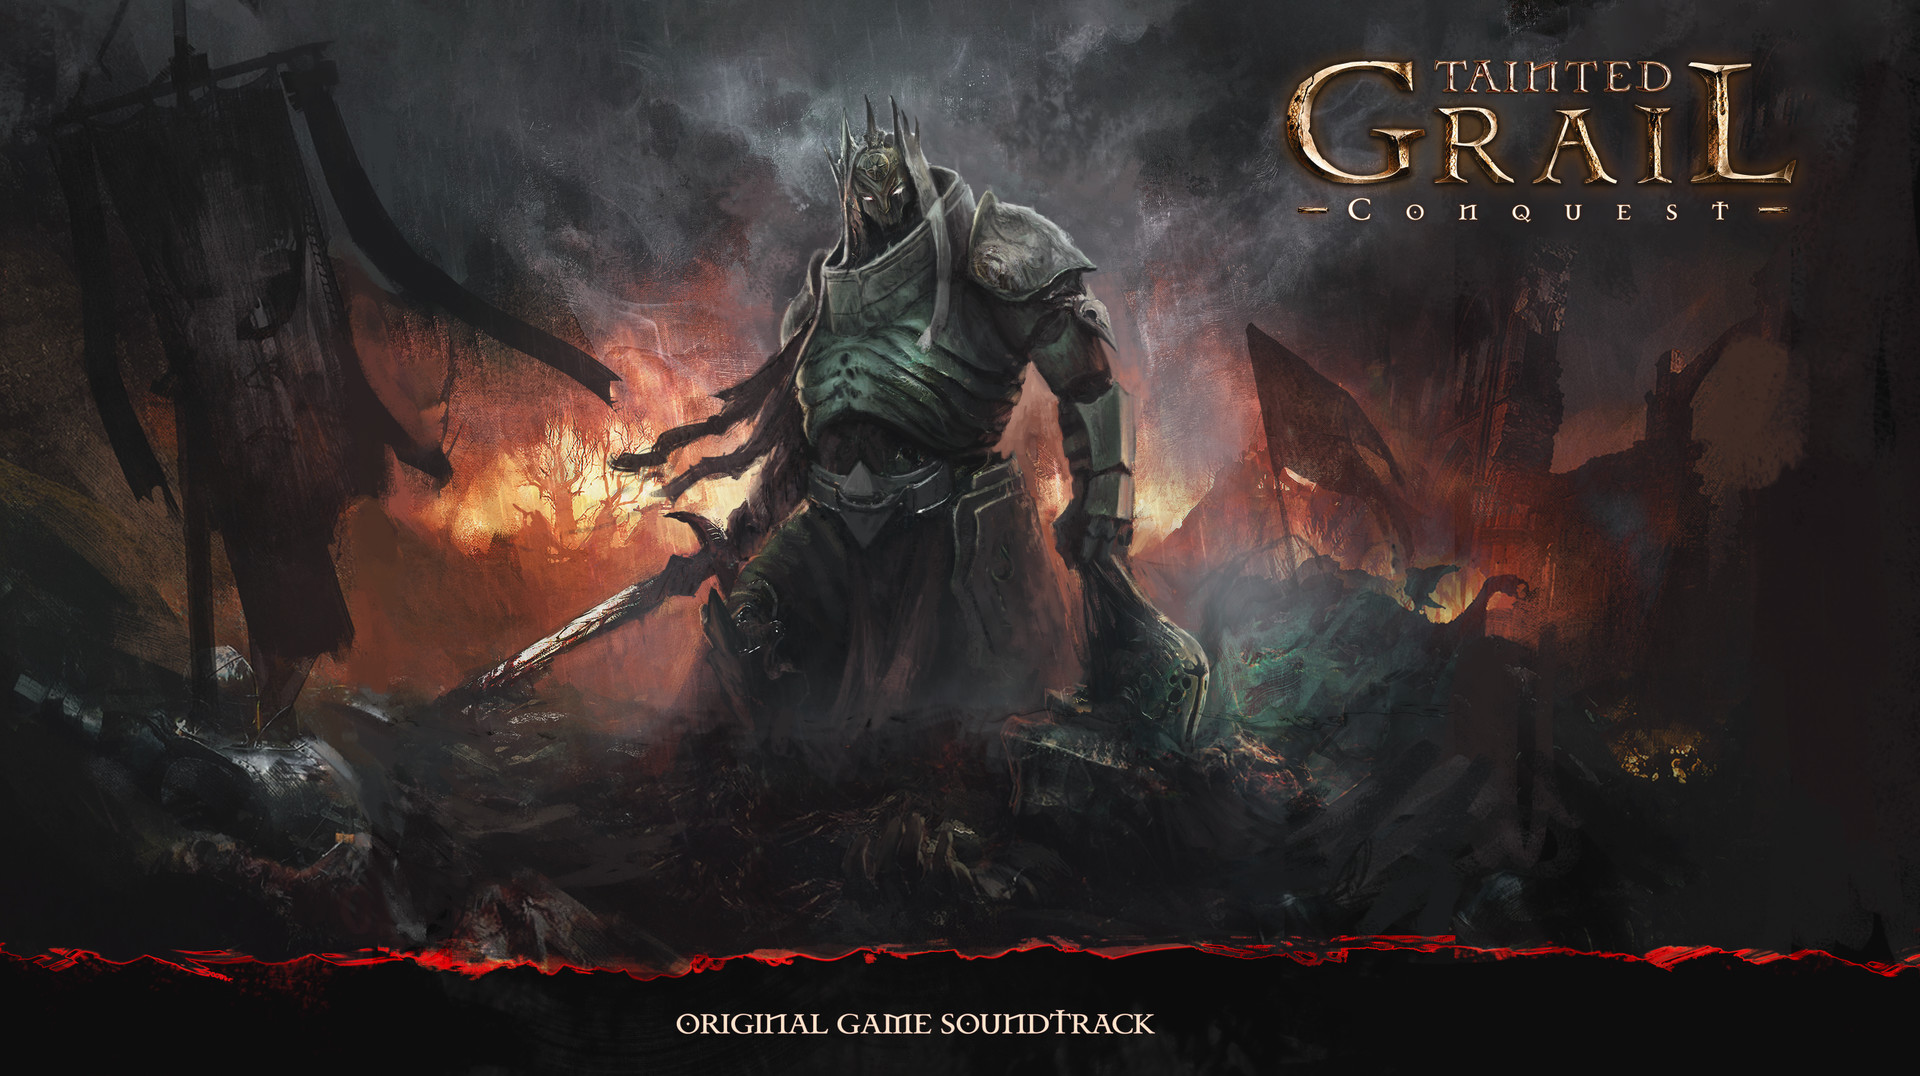 Tainted Grail: Conquest — Soundtrack Featured Screenshot #1